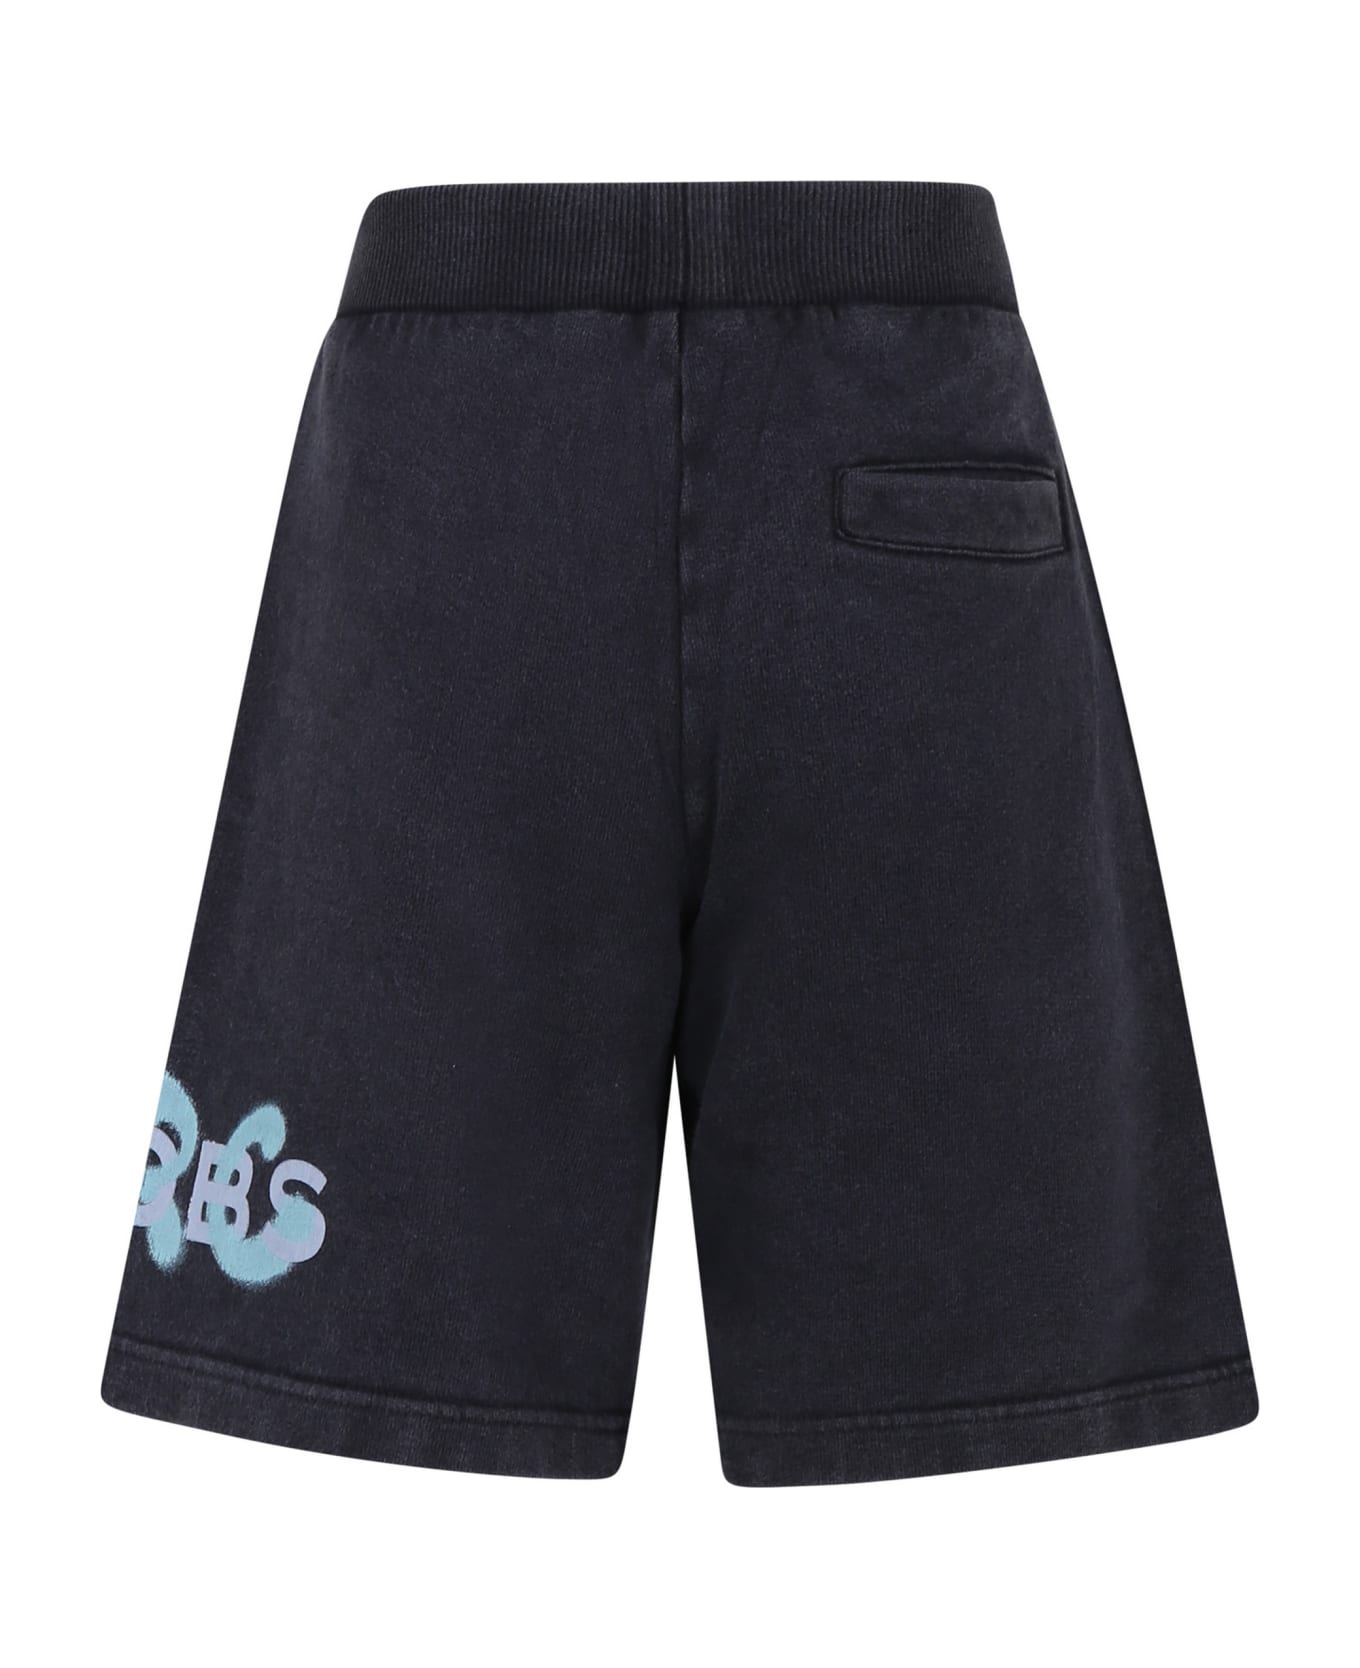 Little Marc Jacobs Black Shorts For Boy With Logo - Black ボトムス